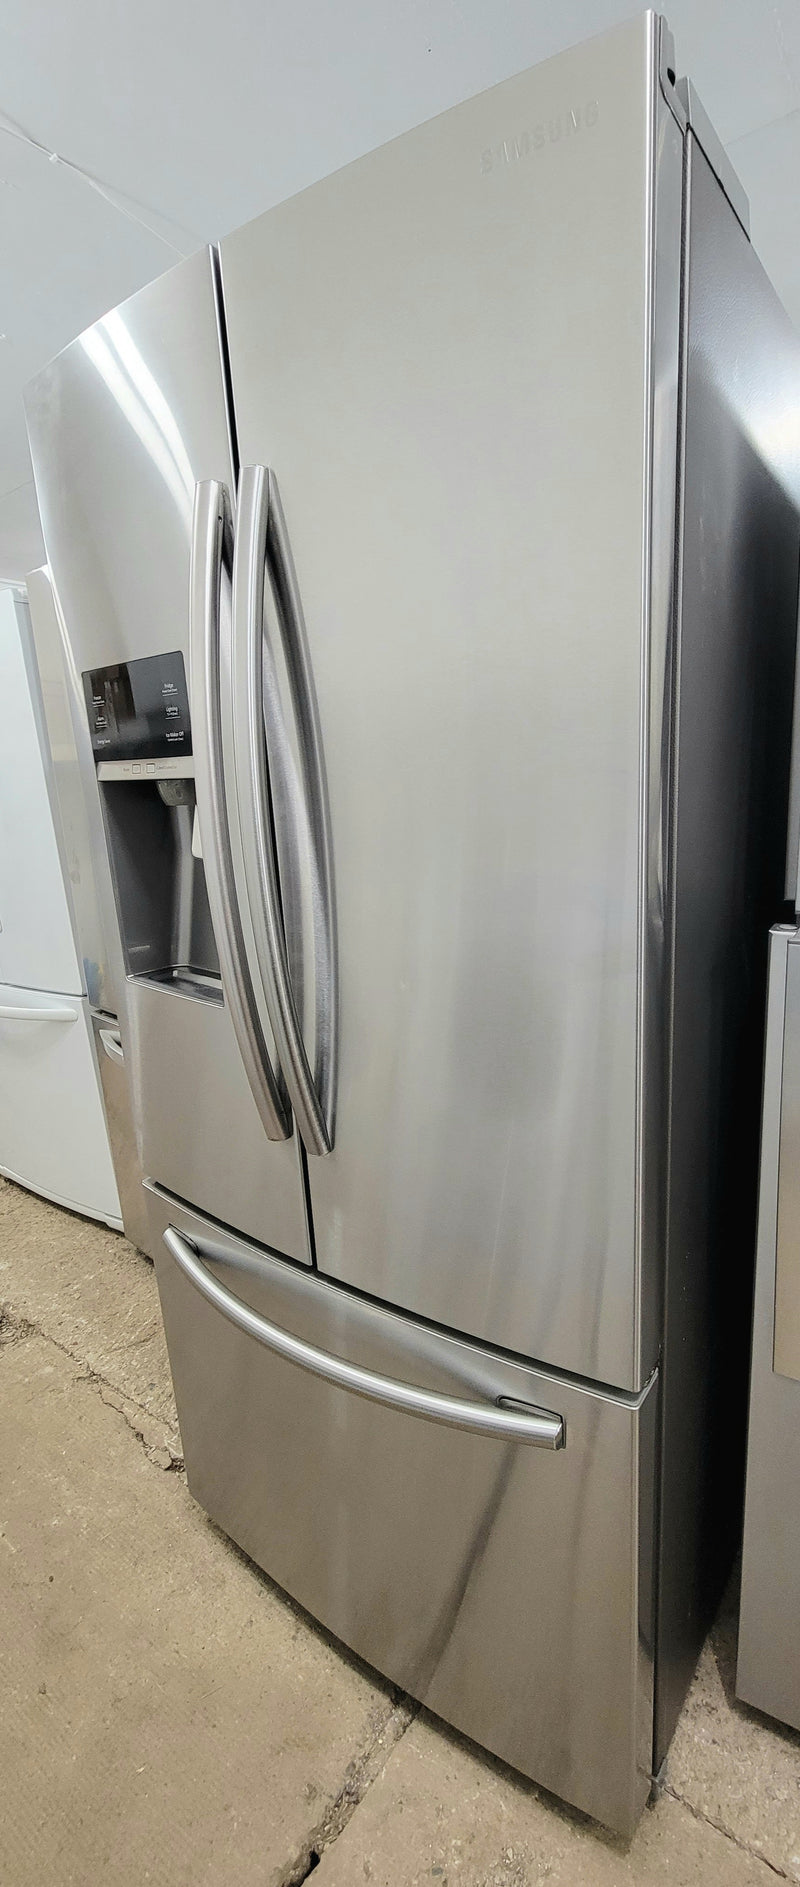 Samsung 33" Wide Stainless Steel French Door Fridge with Water and Ice Maker, Free 60 Day Warranty